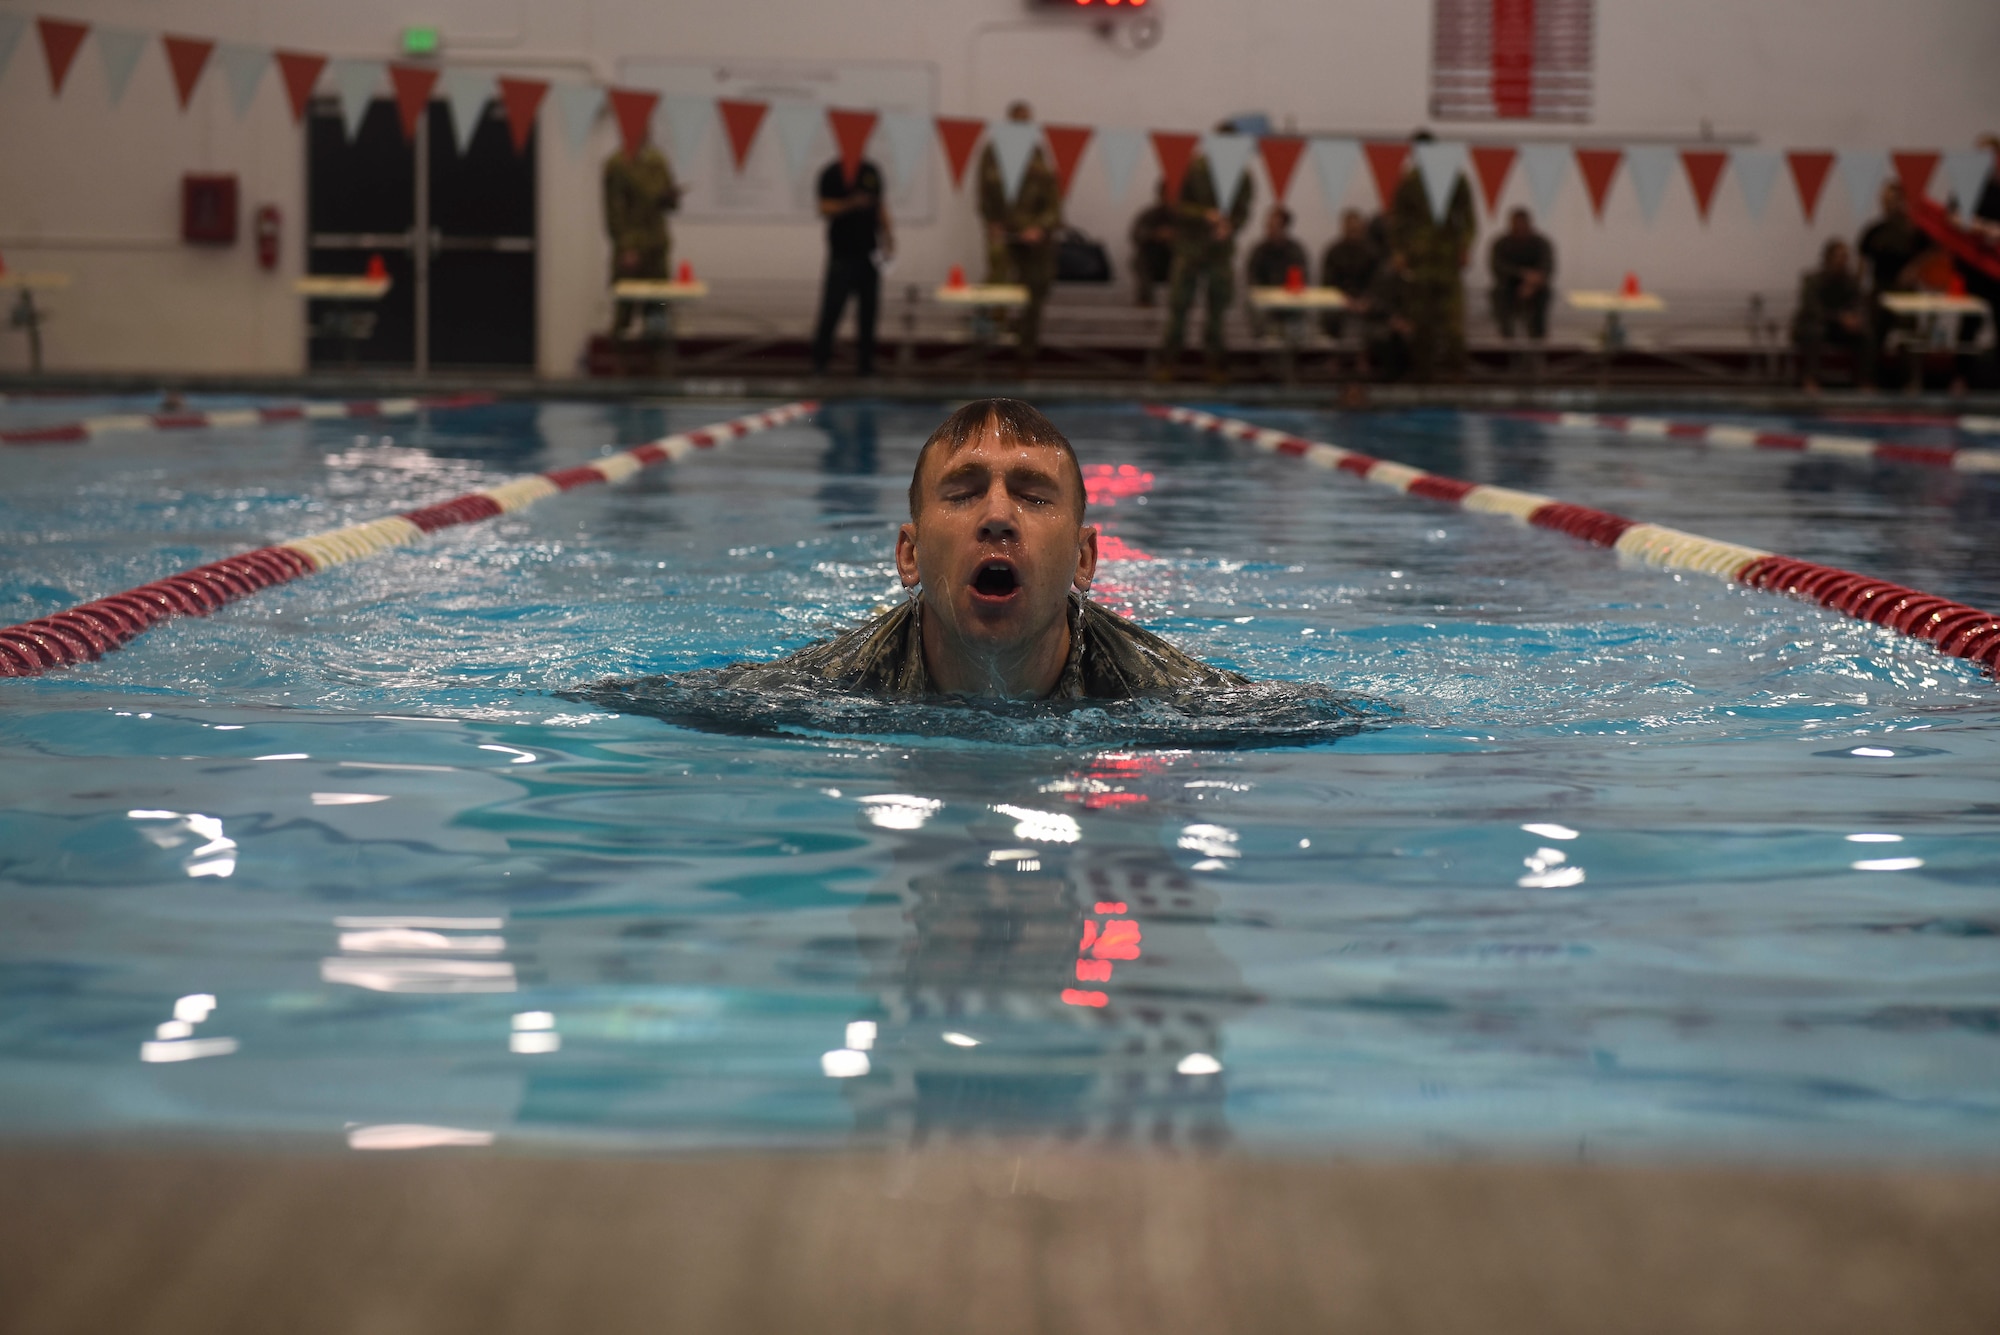 U.S. Air Force Staff Sgt. Christopher Munro, 92nd Maintenance Squadron Aerospace Ground Equipment craftsman, performs in the uniformed swim event during the German Armed Forces Proficiency Badge competition Nov. 17, 2018, at Eastern Washington University in Cheney, Washington. The GAFPB originates from the Bundeswehr, the unified armed forces of the Federal Republic of Germany, and can be awarded to any German or allied soldier. (U.S. Air Force photo/Airman 1st Class Lawrence Sena)